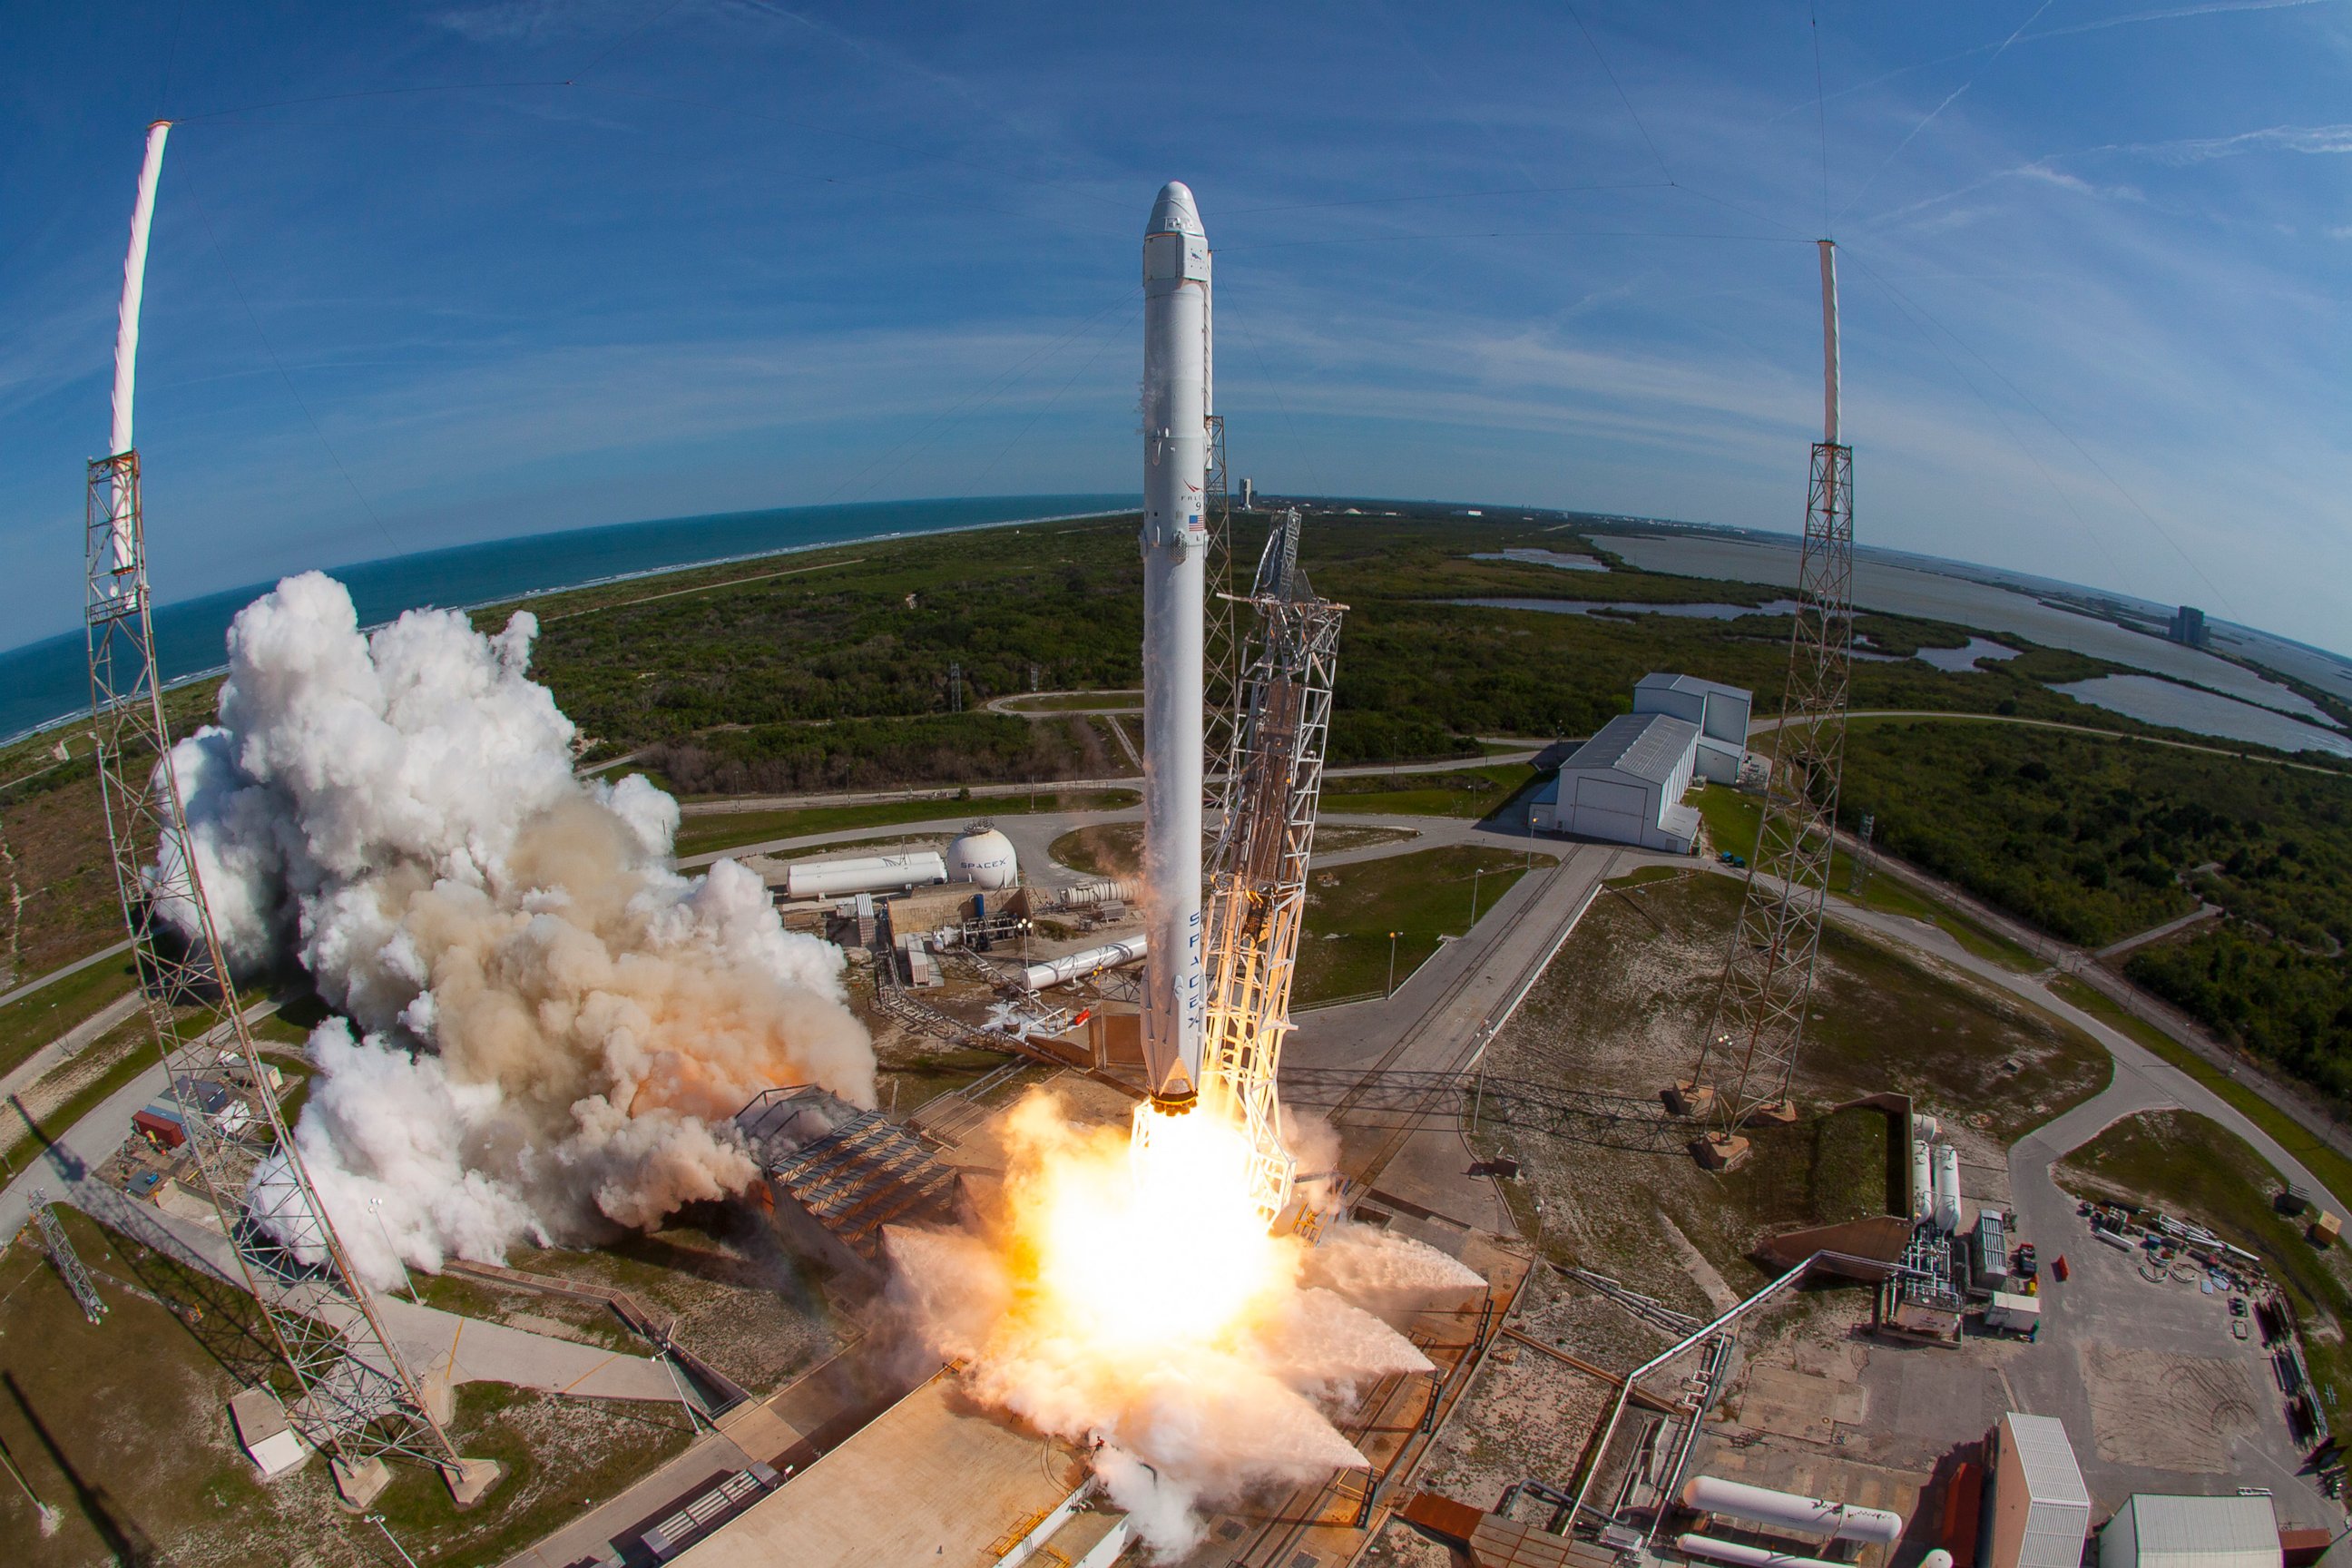 PHOTO: SpaceX's Falcon 9 rocket and Dragon spacecraft lift off from Launch Complex 40 at the Cape Canaveral Air Force Station for their eighth official Commercial Resupply (CRS) mission, April 8, 2016, in Cape Canaveral, Florida.